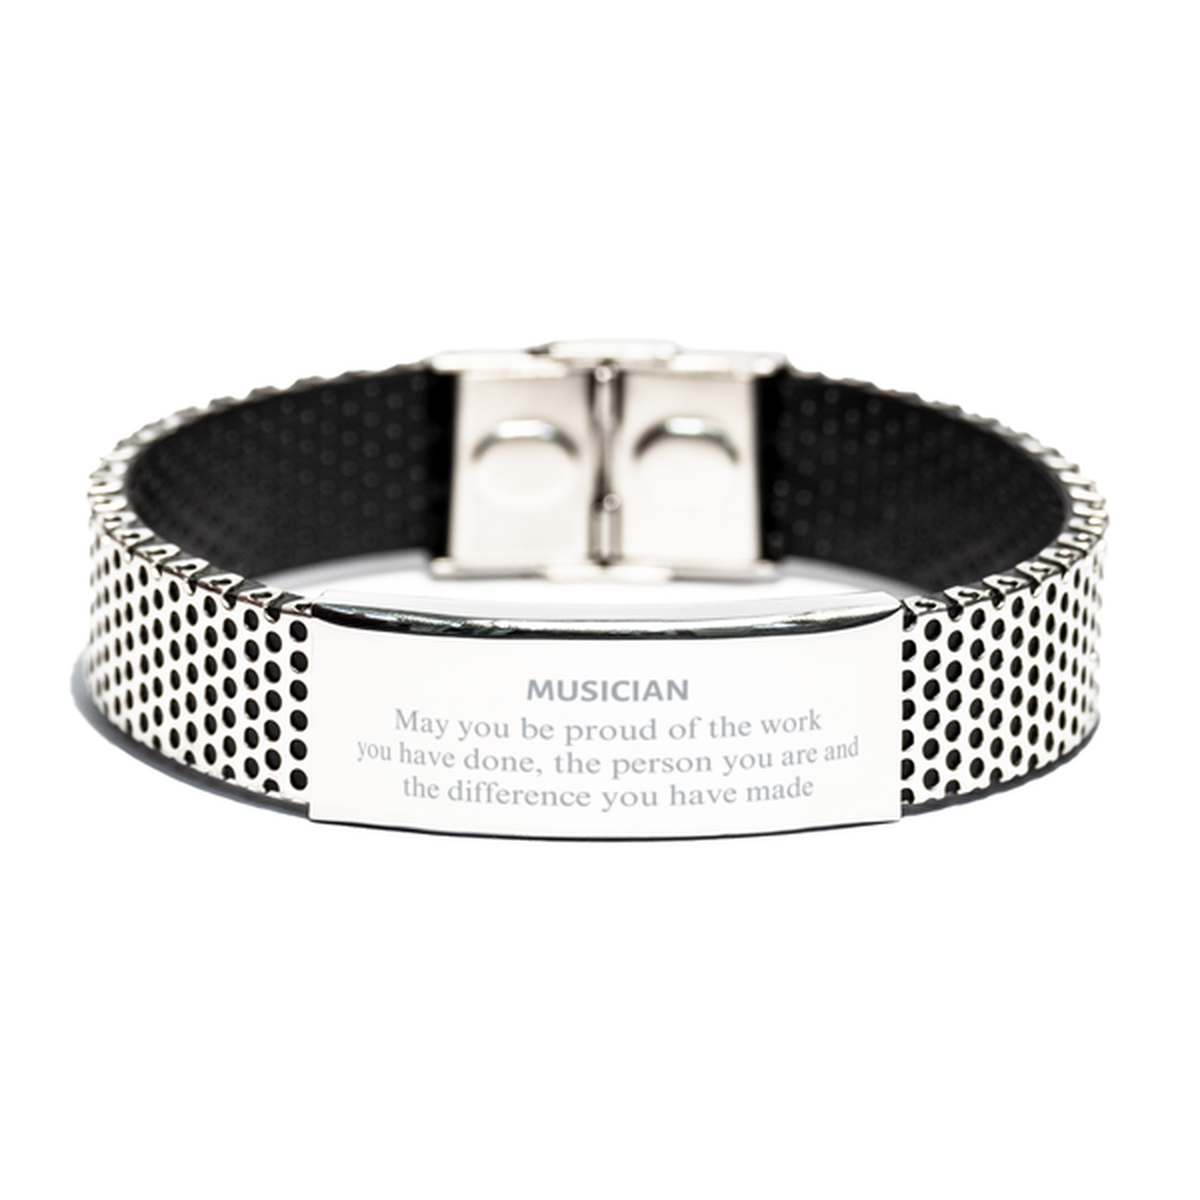 Musician May you be proud of the work you have done, Retirement Musician Stainless Steel Bracelet for Colleague Appreciation Gifts Amazing for Musician